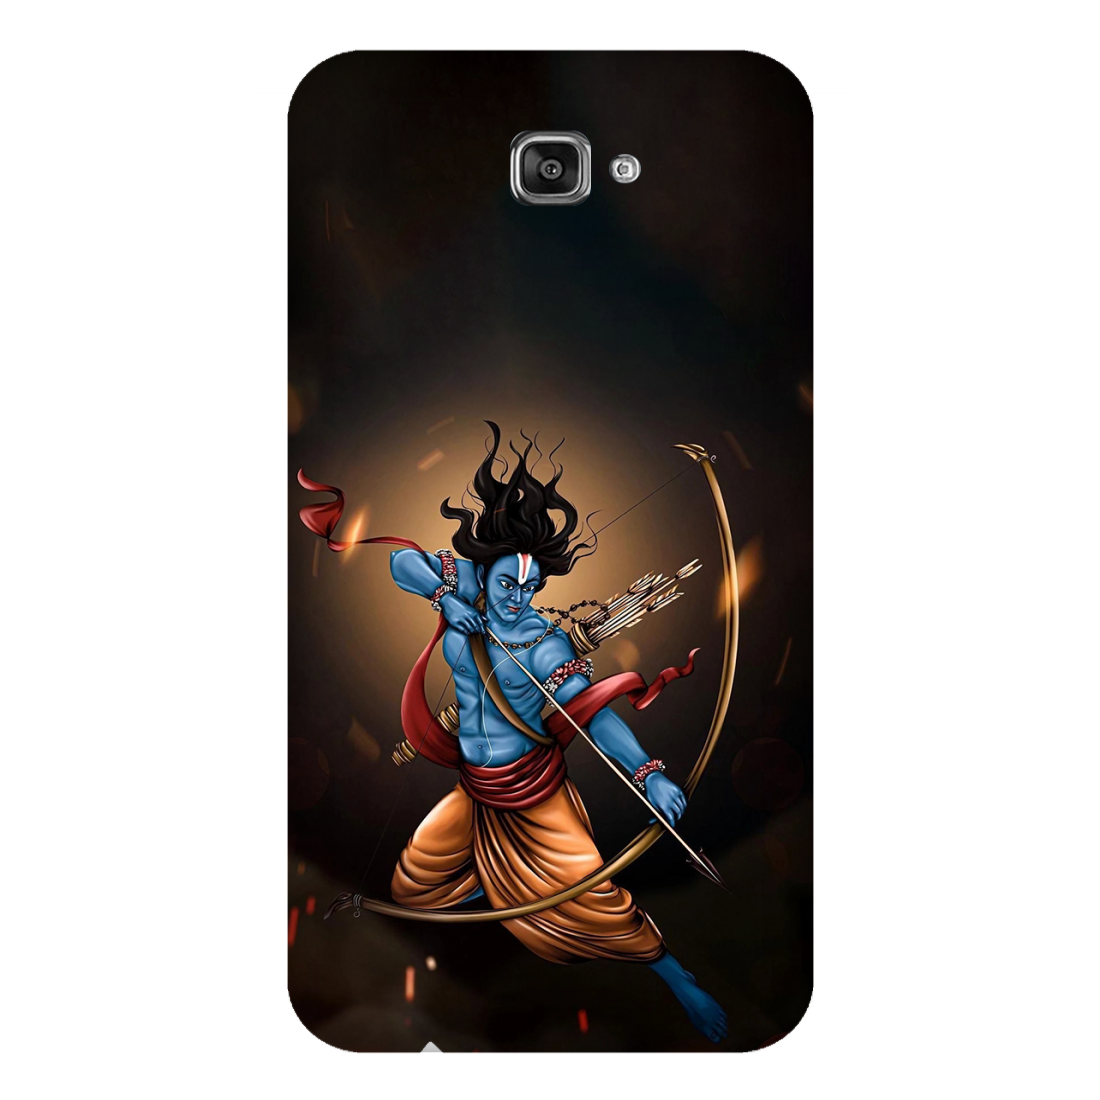 Warrior with Bow in Mystical Light Case Samsung Galaxy J7 Prime 2